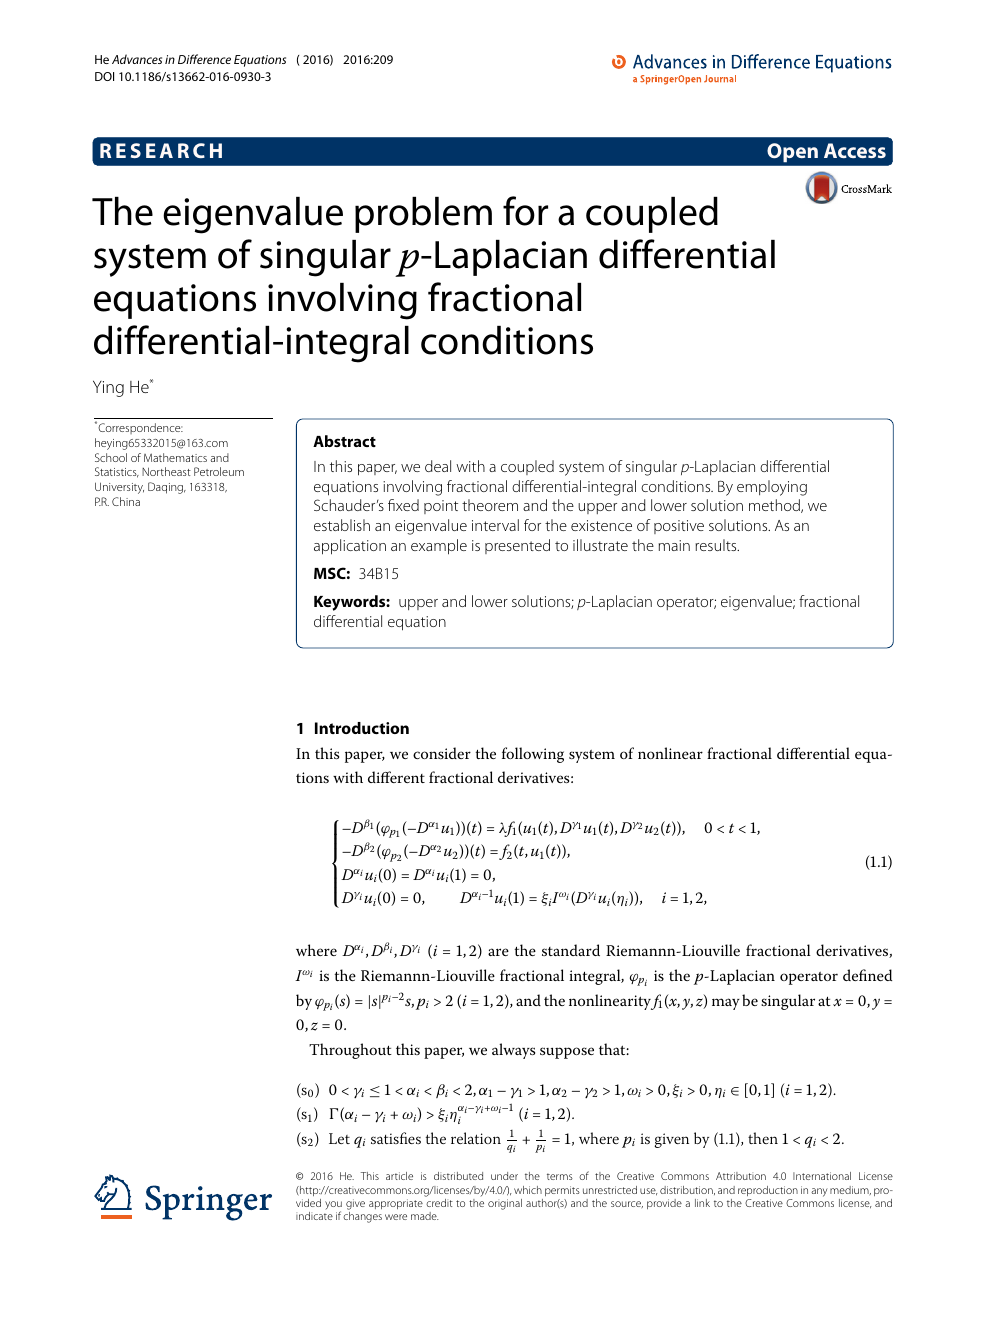 The Eigenvalue Problem For A Coupled System Of Singular P Laplacian Differential Equations Involving Fractional Differential Integral Conditions Topic Of Research Paper In Mathematics Download Scholarly Article Pdf And Read For Free On